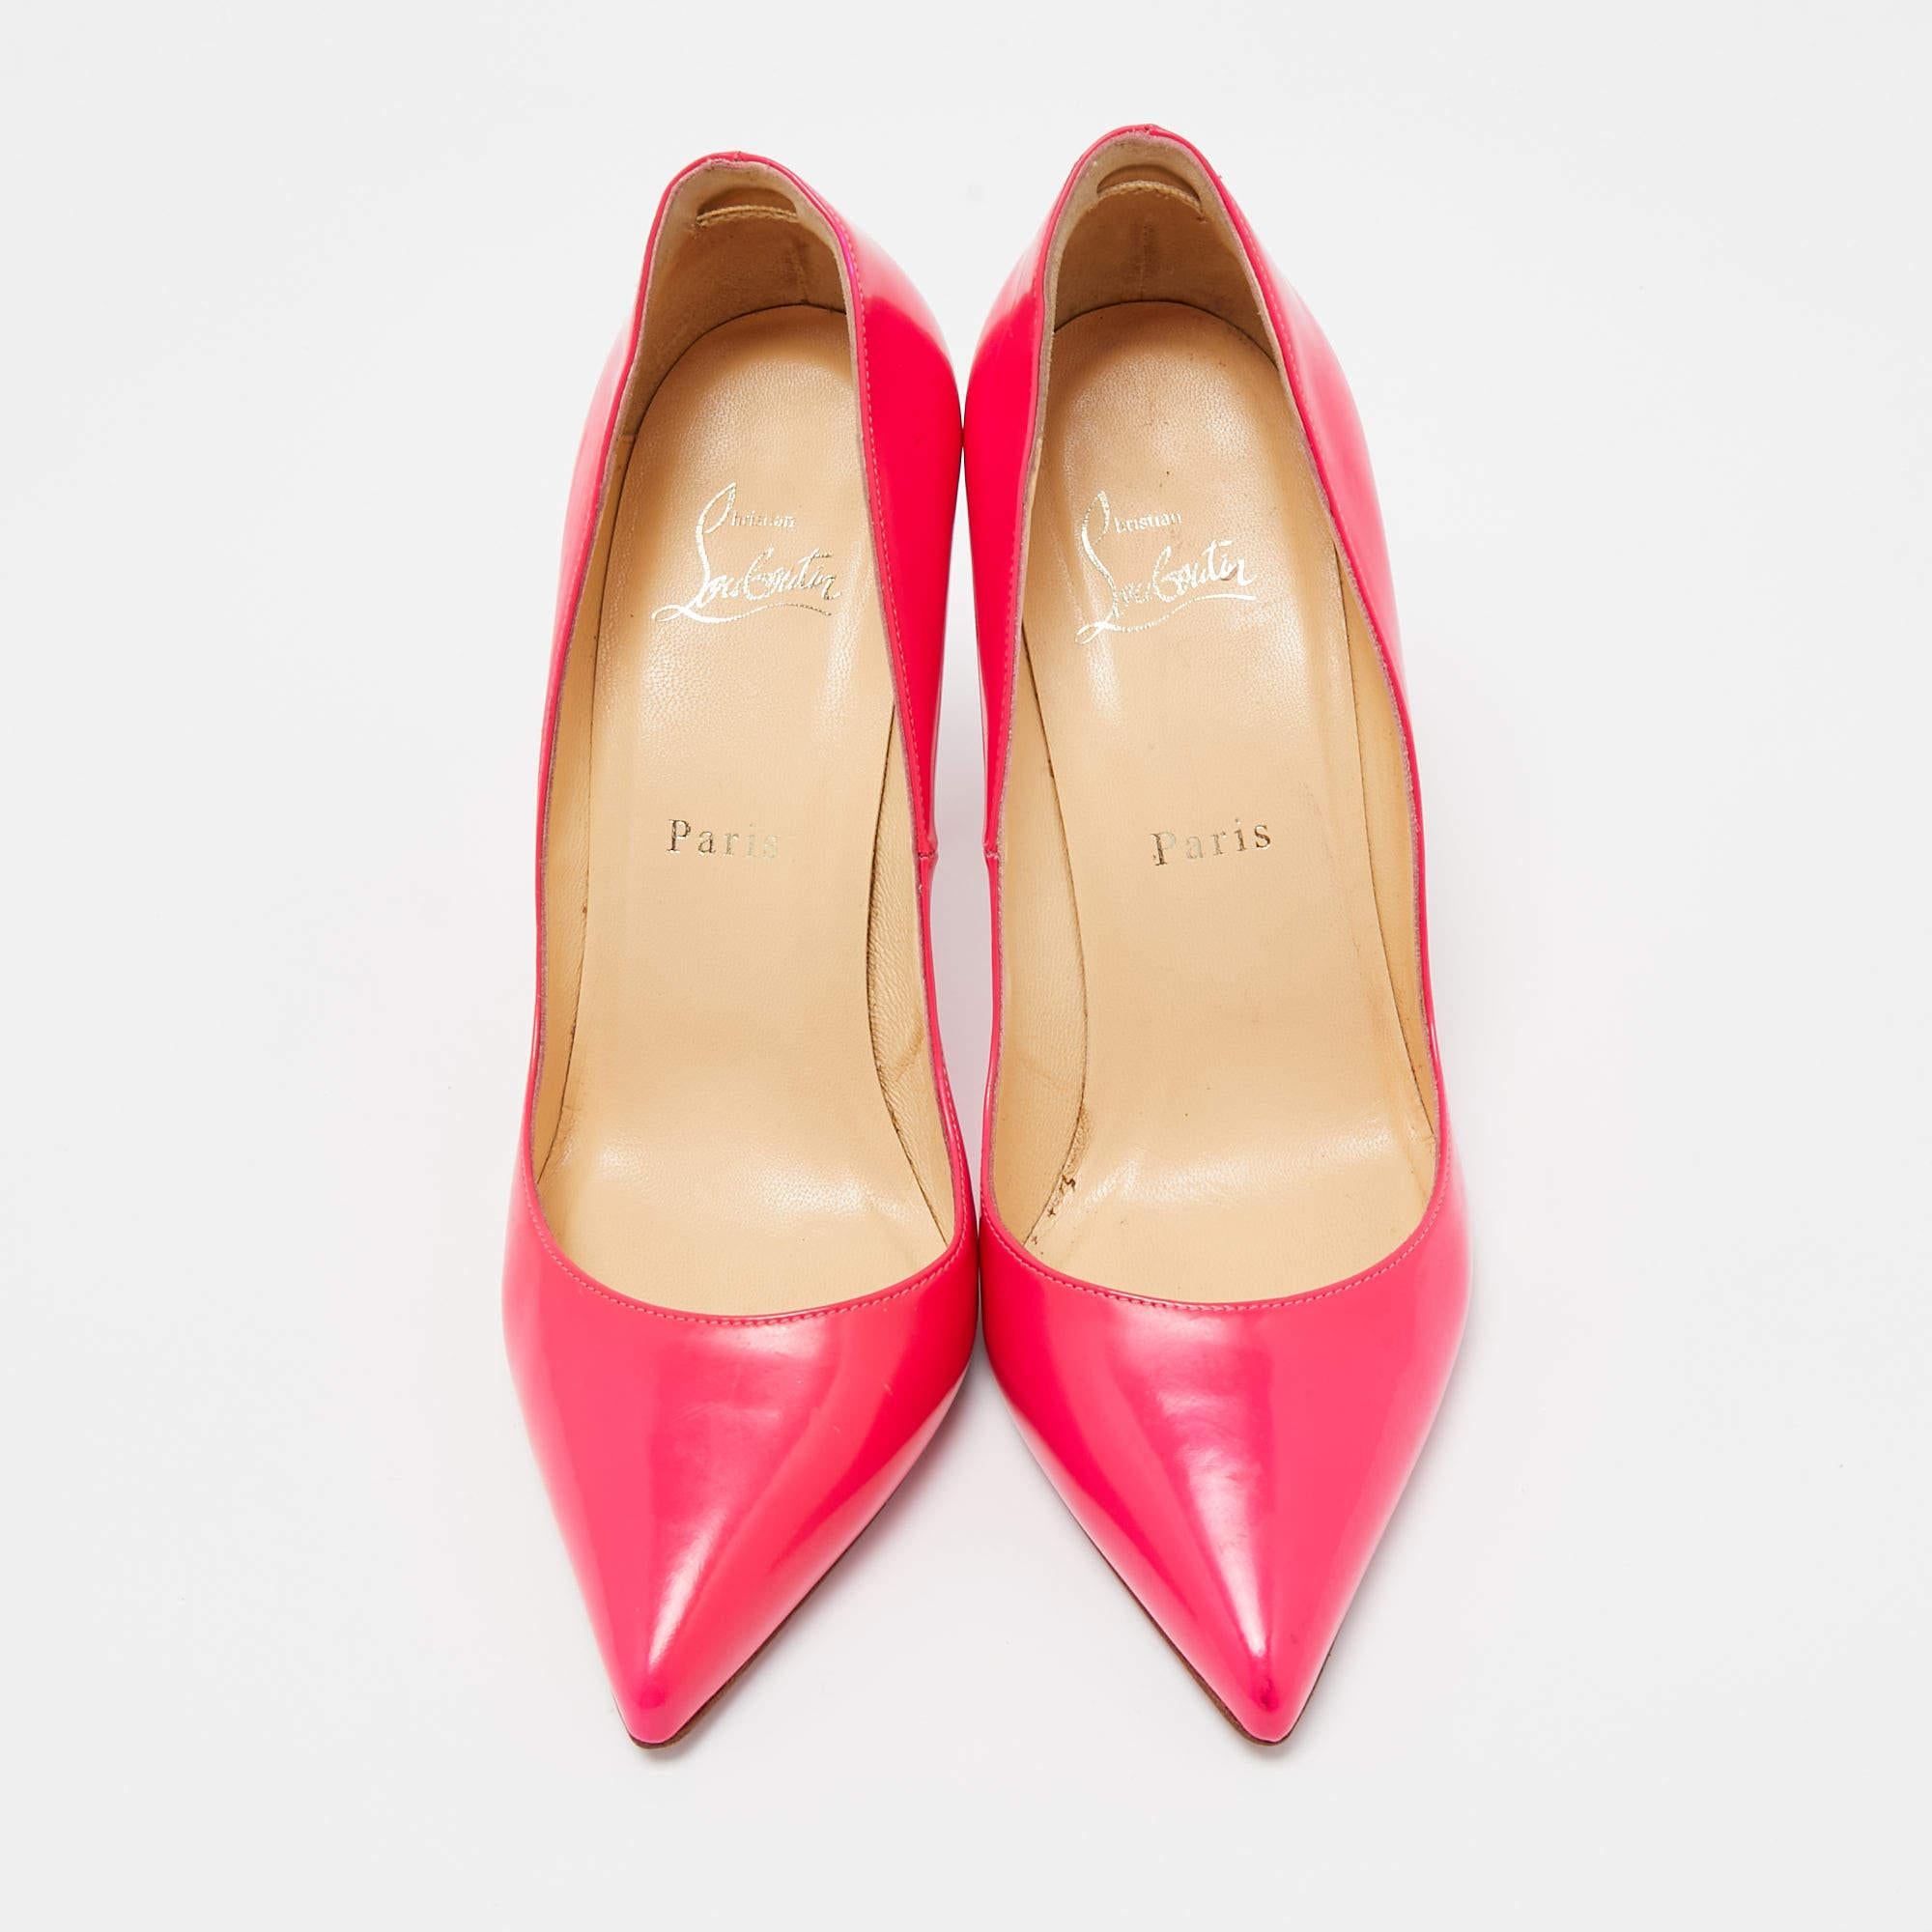 Christian Louboutin Pink Leather So Kate Pointed Toe Pumps Size 38.5 In Good Condition For Sale In Dubai, Al Qouz 2